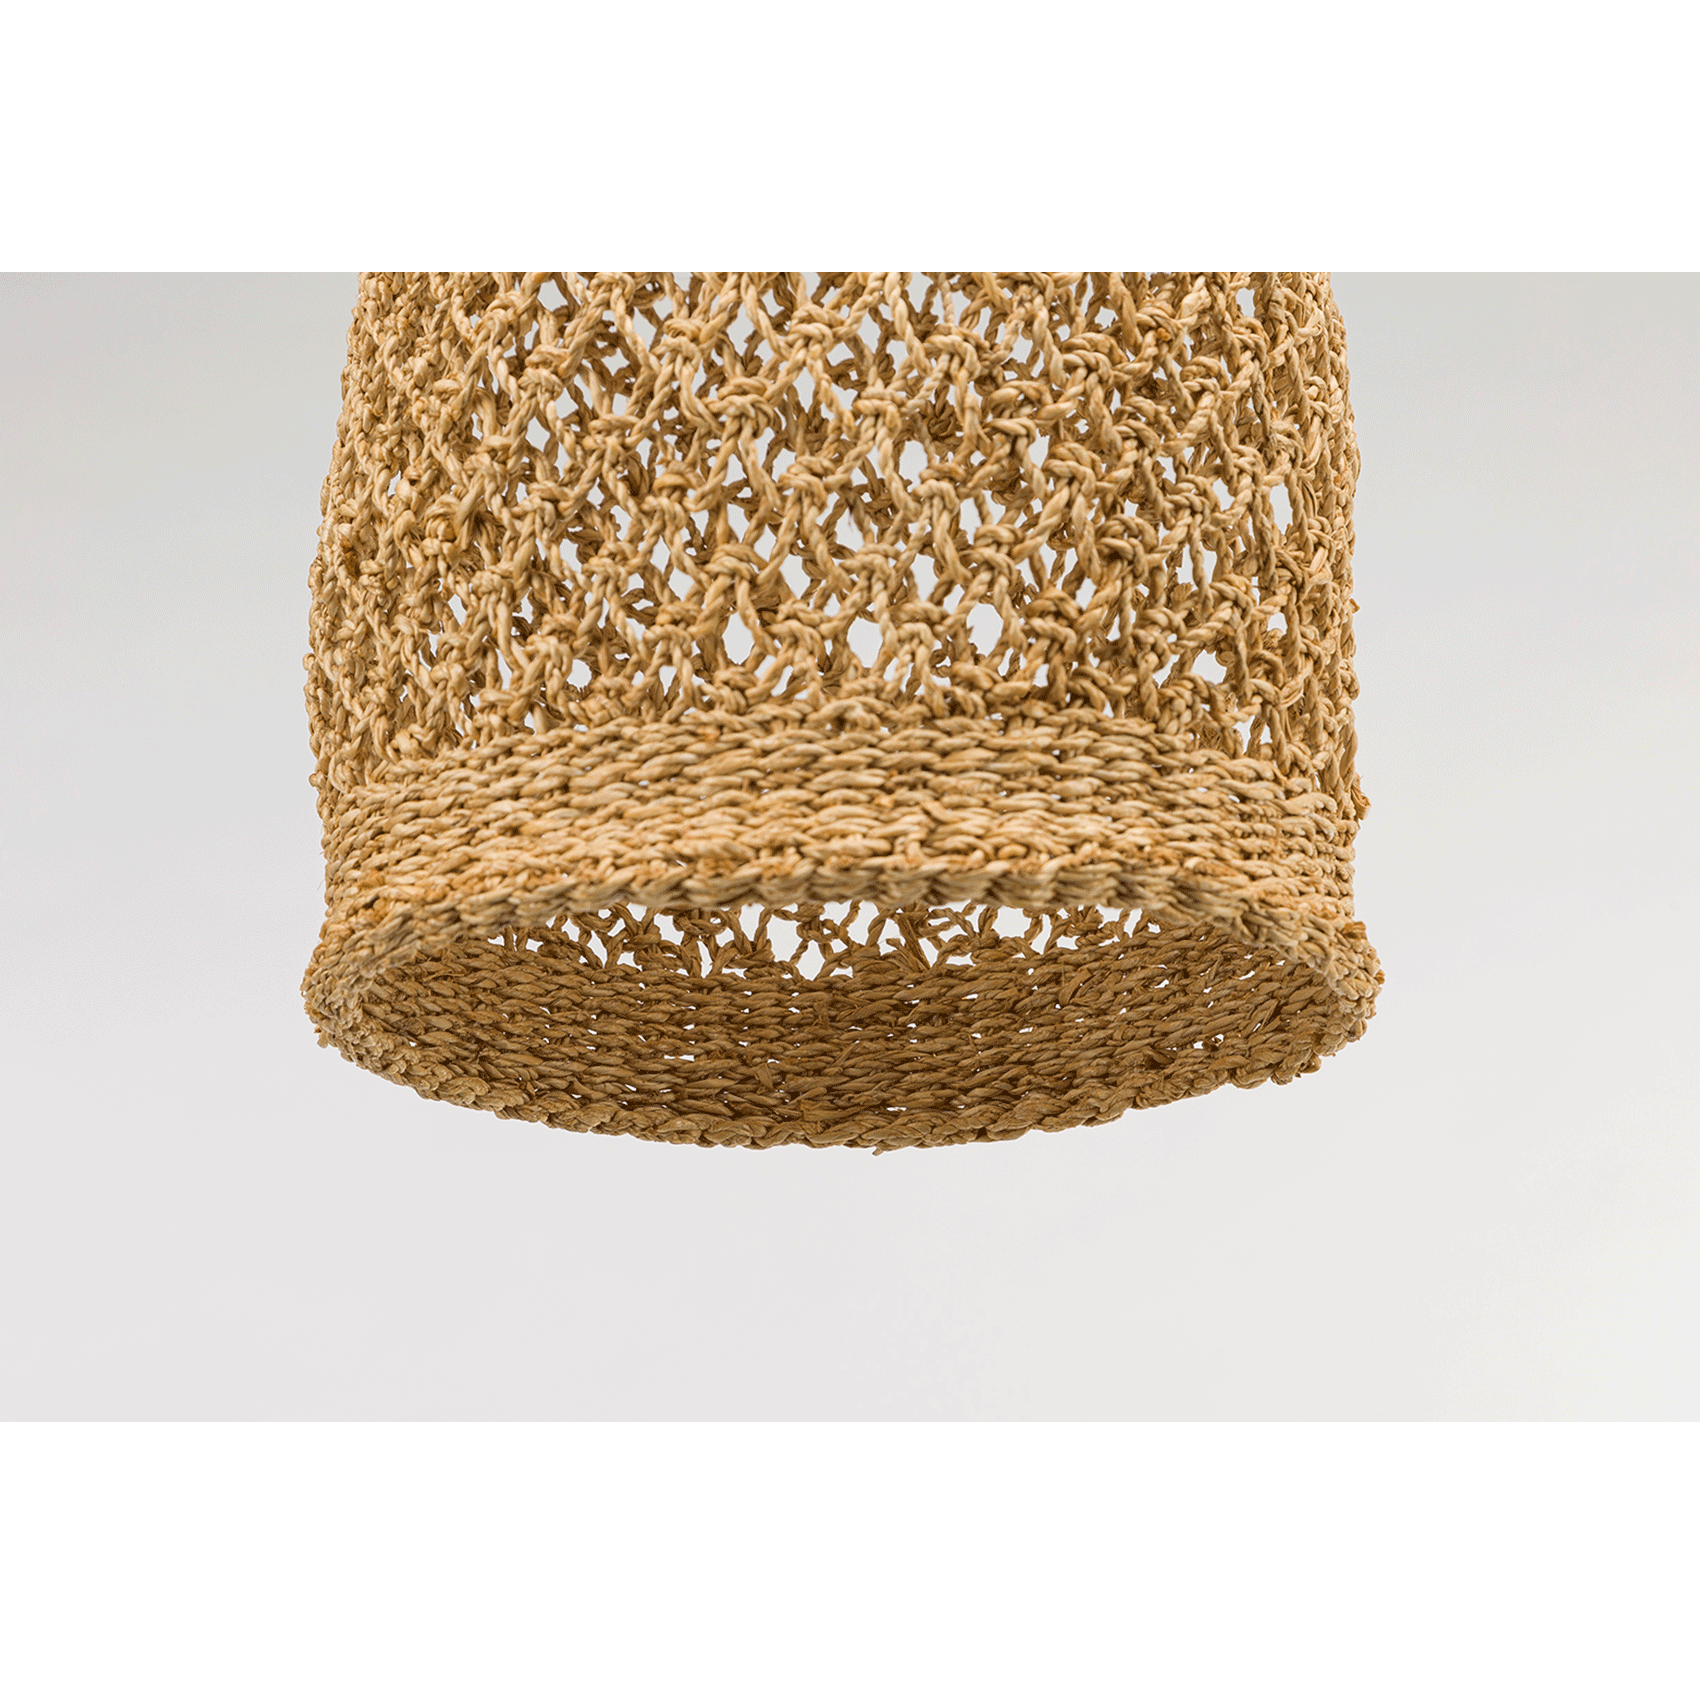 Buy Handcrafted Banana Bark Rope Suspended Lights in Bangalore